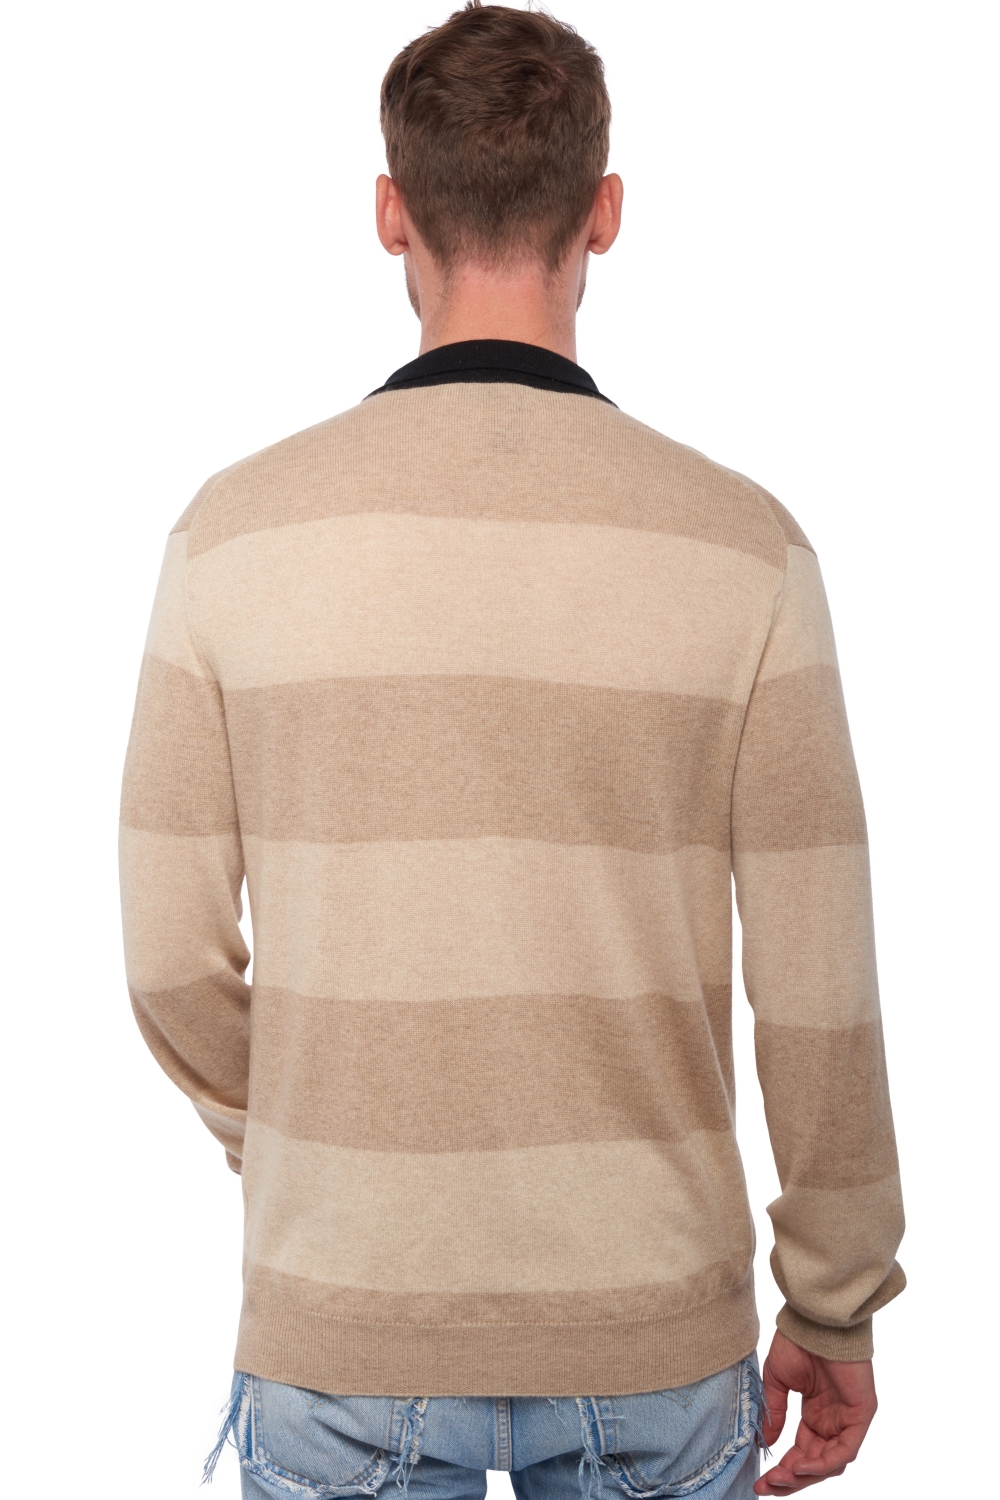 Cashmere men polo style sweaters vecinos natural brown natural beige s